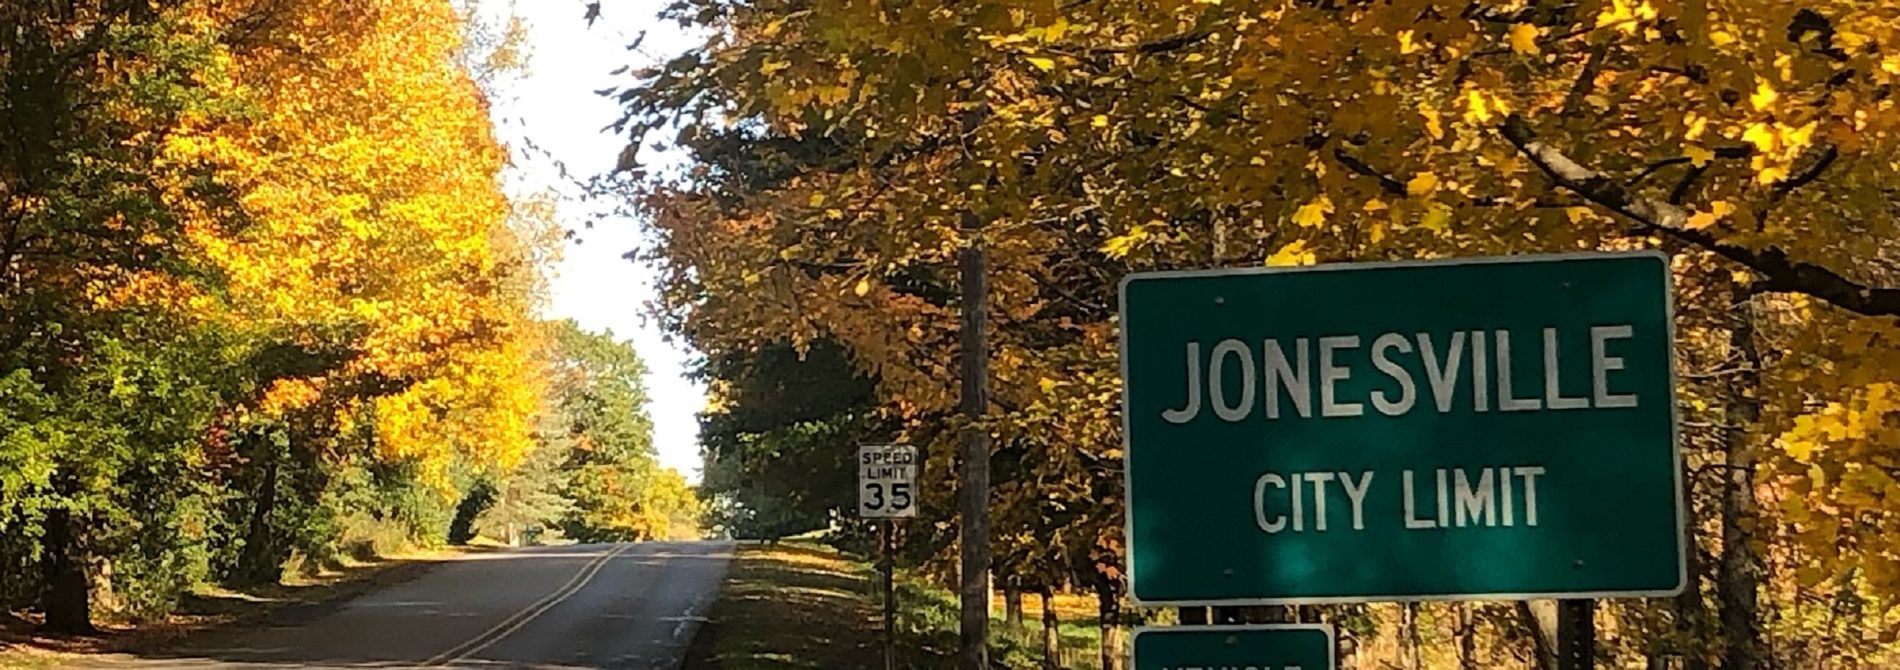 green city limits sign amidst yellow leaves of trees lining a road